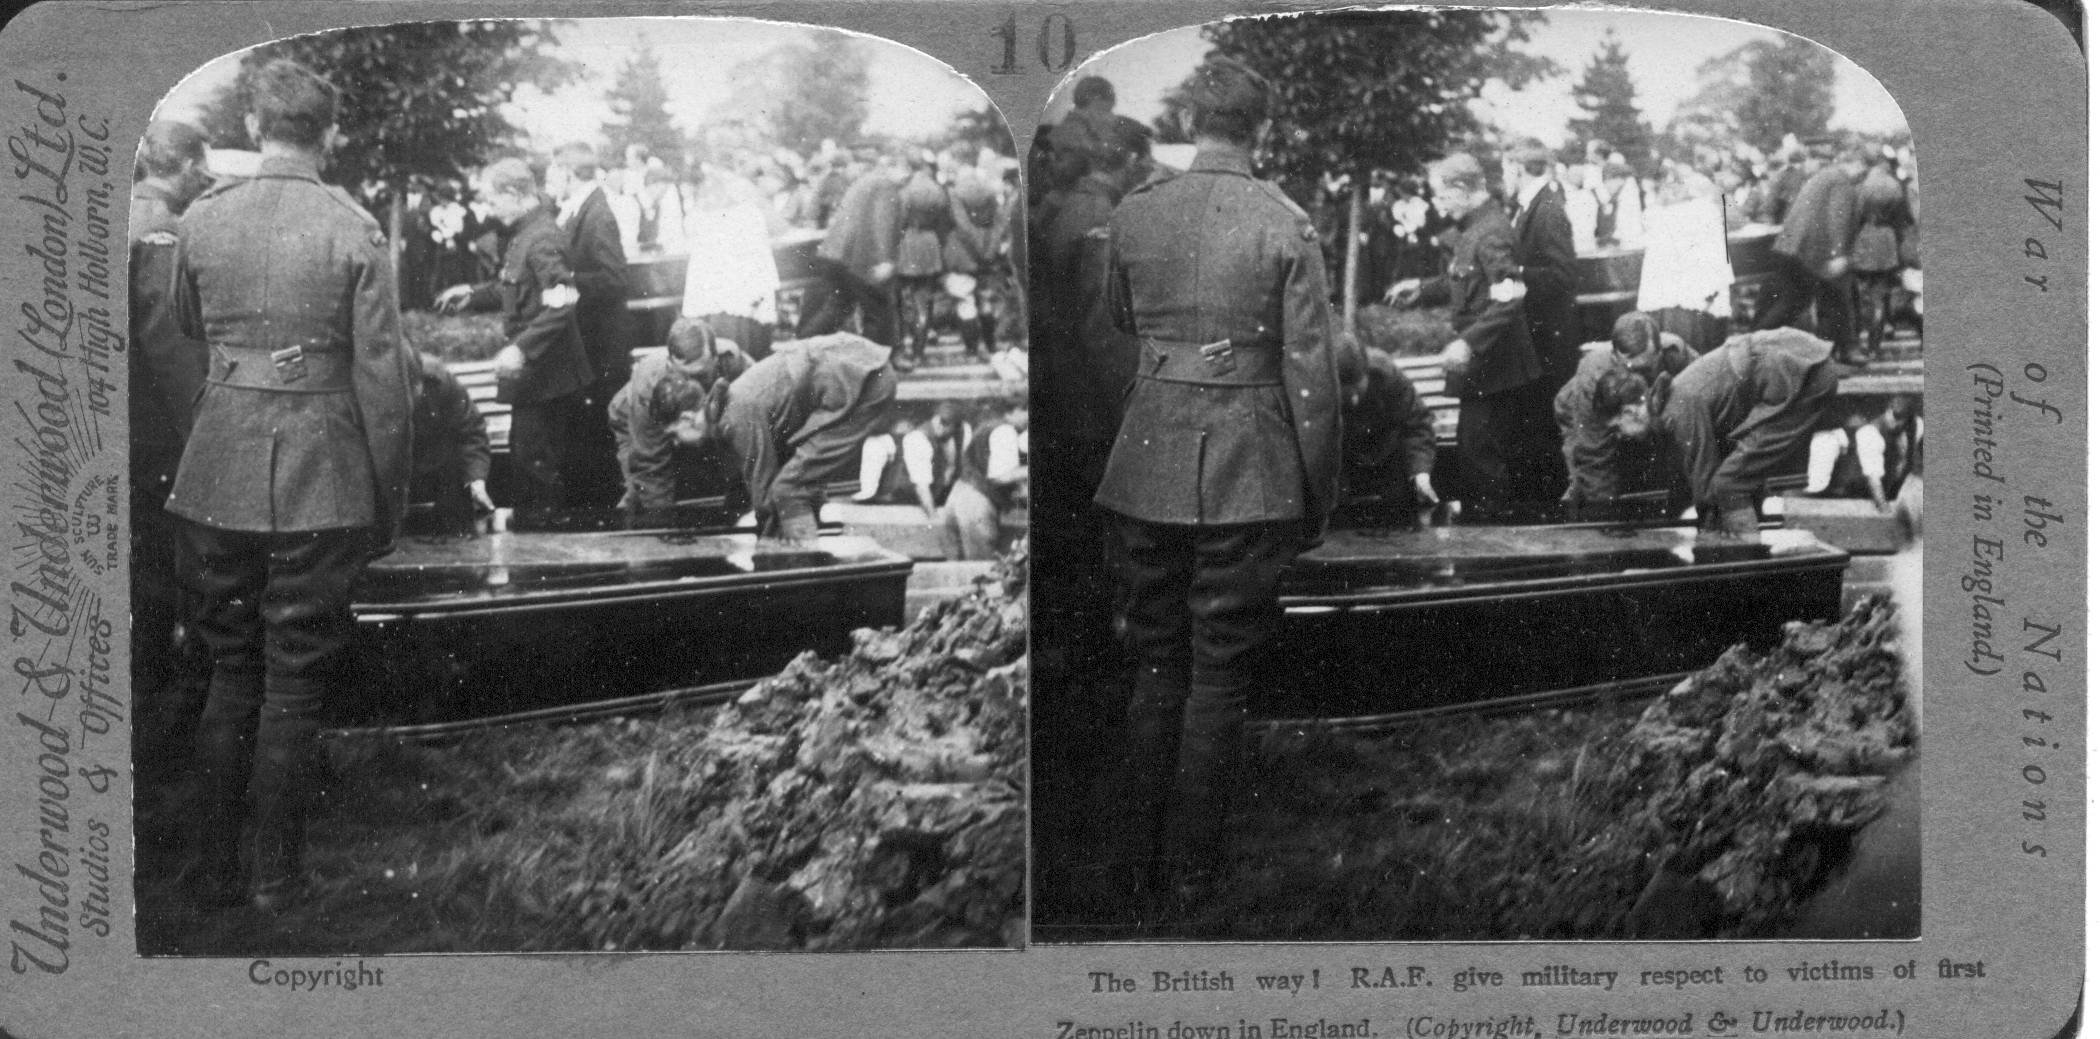 The British way! R.A.F. give military respect to victims of first Zeppelin down in England